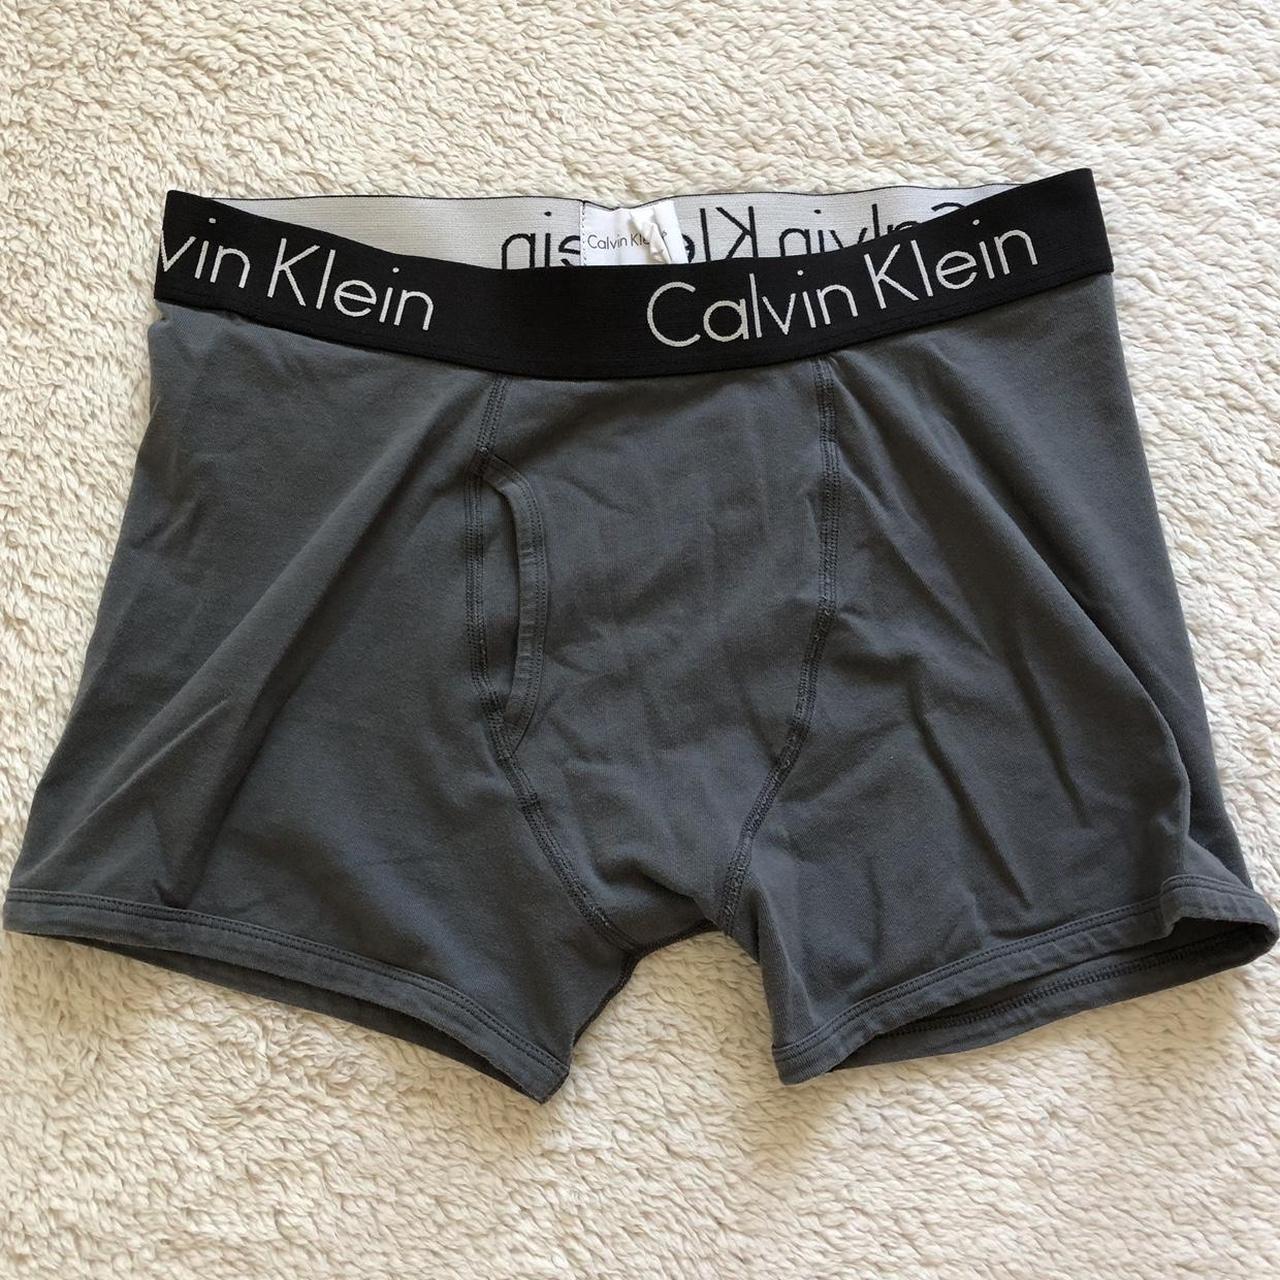 Calvin Klein Men's Grey and Silver Boxers-and-briefs